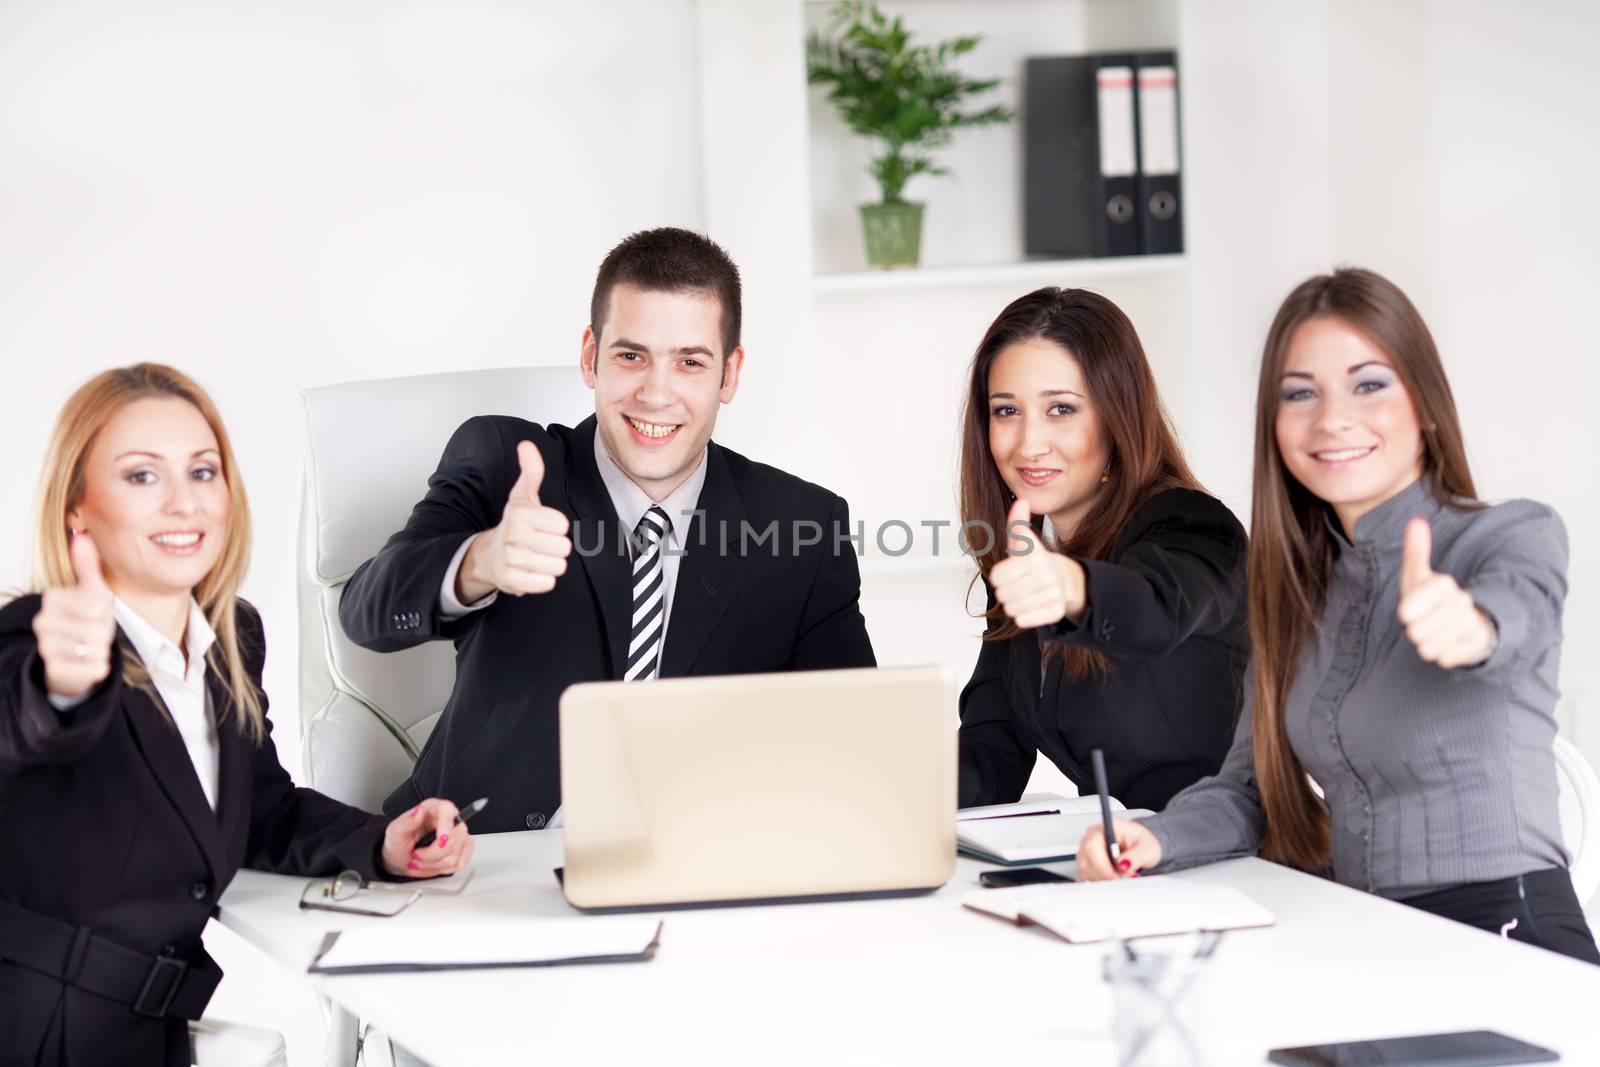 Four happy Business people showing thumbs up in the office, Looking at camera.